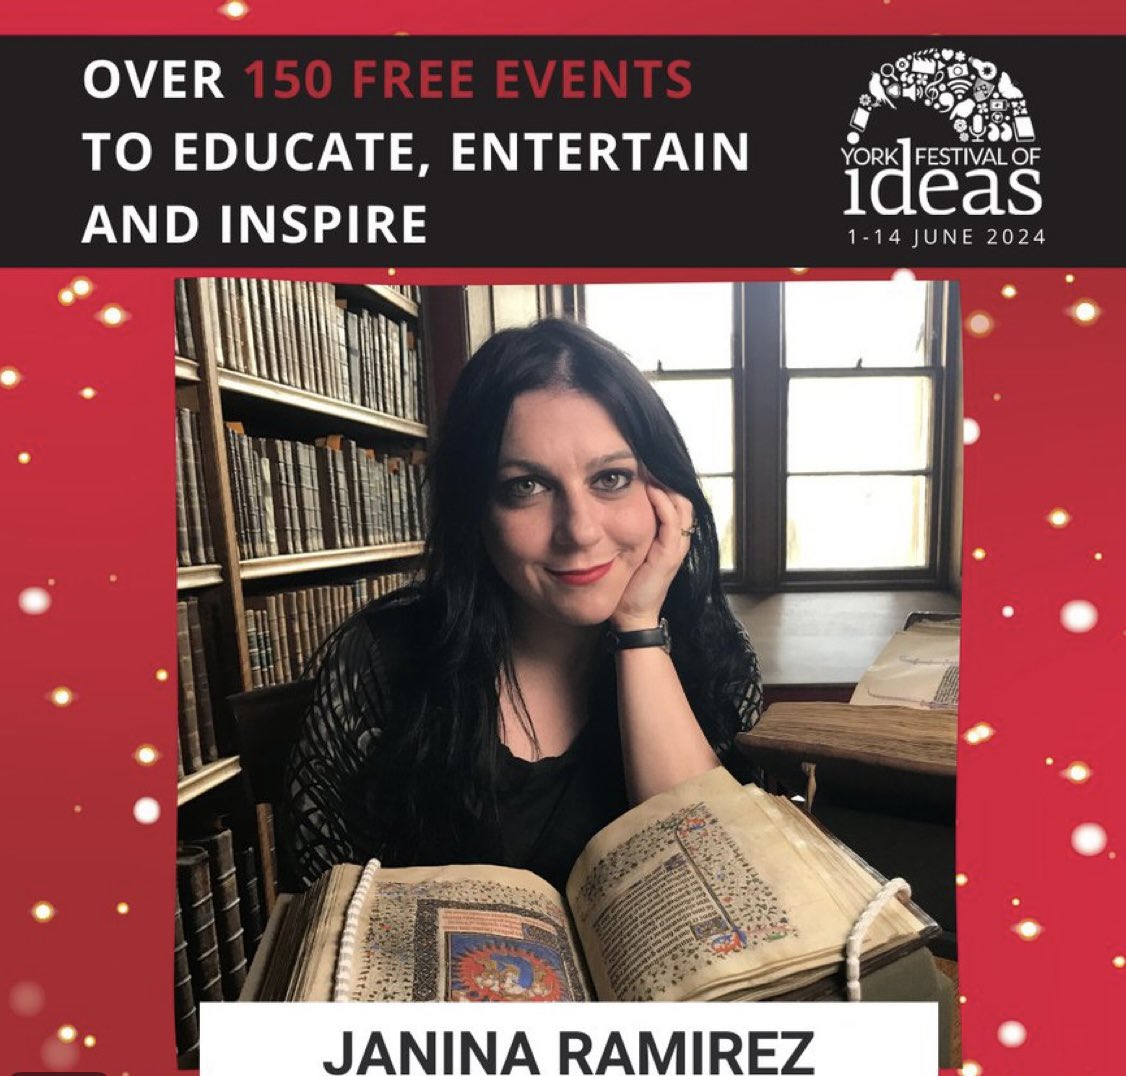 We're thrilled that historian and broadcaster @DrJaninaRamirez will be back at the @YorkFestofIdeas in June. See the medieval world with fresh eyes as she introduces the stories of some remarkable women struck out of history #YorkIdeas